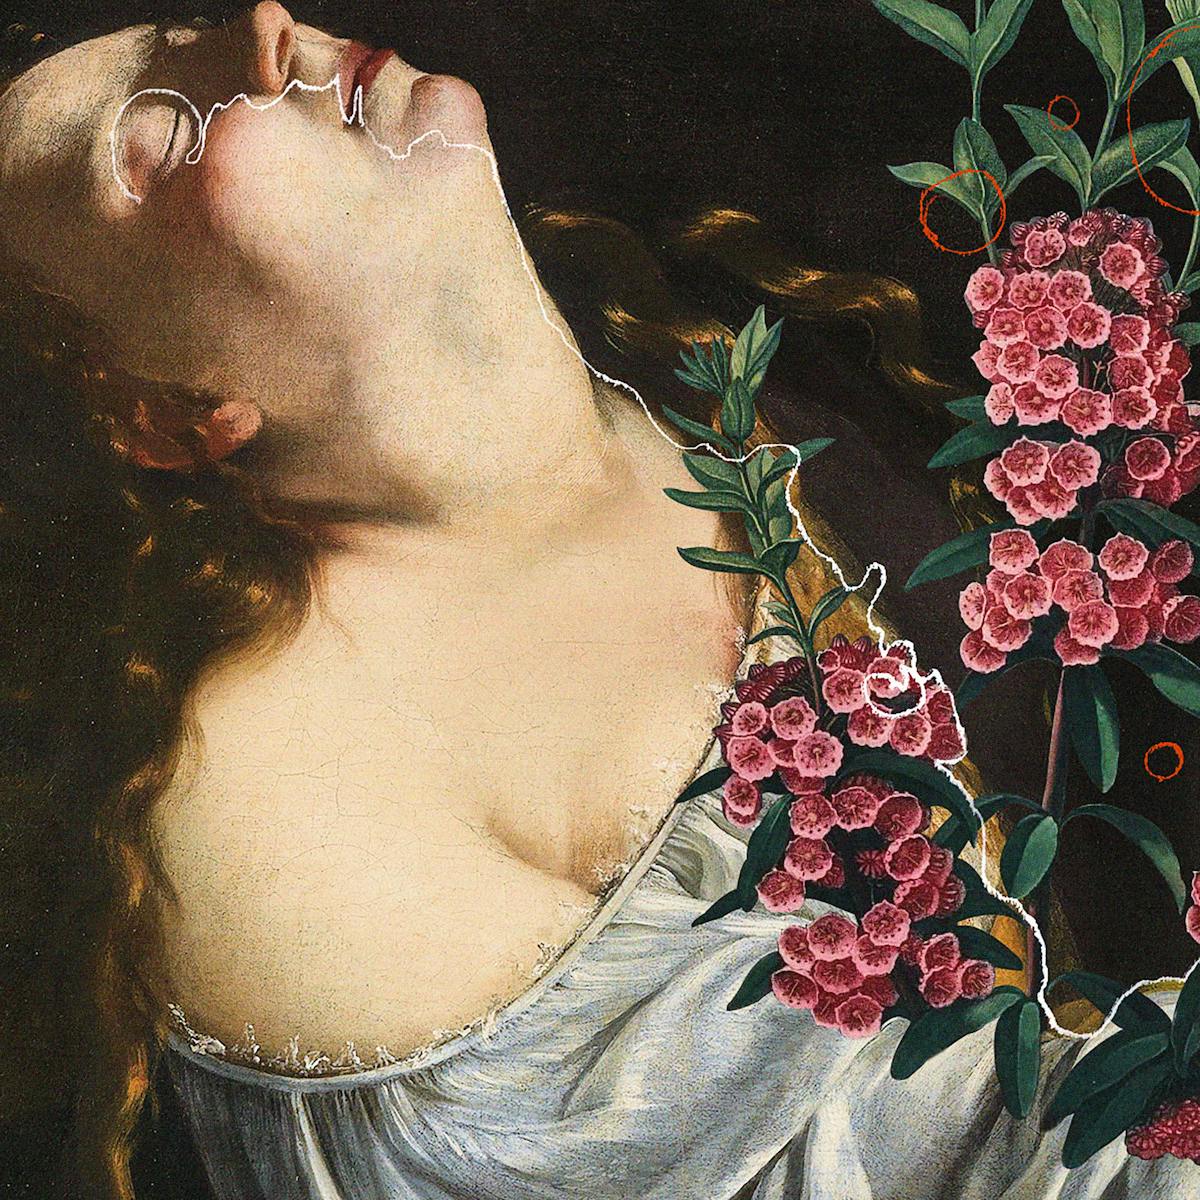 Digital montage artwork using elements from  the work of 16th century female baroque painter Artemisia Gentileschi, combined with other imagery and illustrative elements. The image shows a woman from the side with her head and neck arched backwards towards the right of the image, her eyes are closed and her long hair flows down her back. She has the fingers of her hands clasped together around her knee. The background of the image is dark with the texture of a varnished oil canvas. Added over the top of the oil painting is a robin perched on her knee, red circles of different sizes, like bubbles, and a floral plant, Narrow leaved Kalmia, with pink flowers and green leaves. There is a thin white line which meanders and zig-zags across the image from the woman's right eye, down her body and over to the robin.